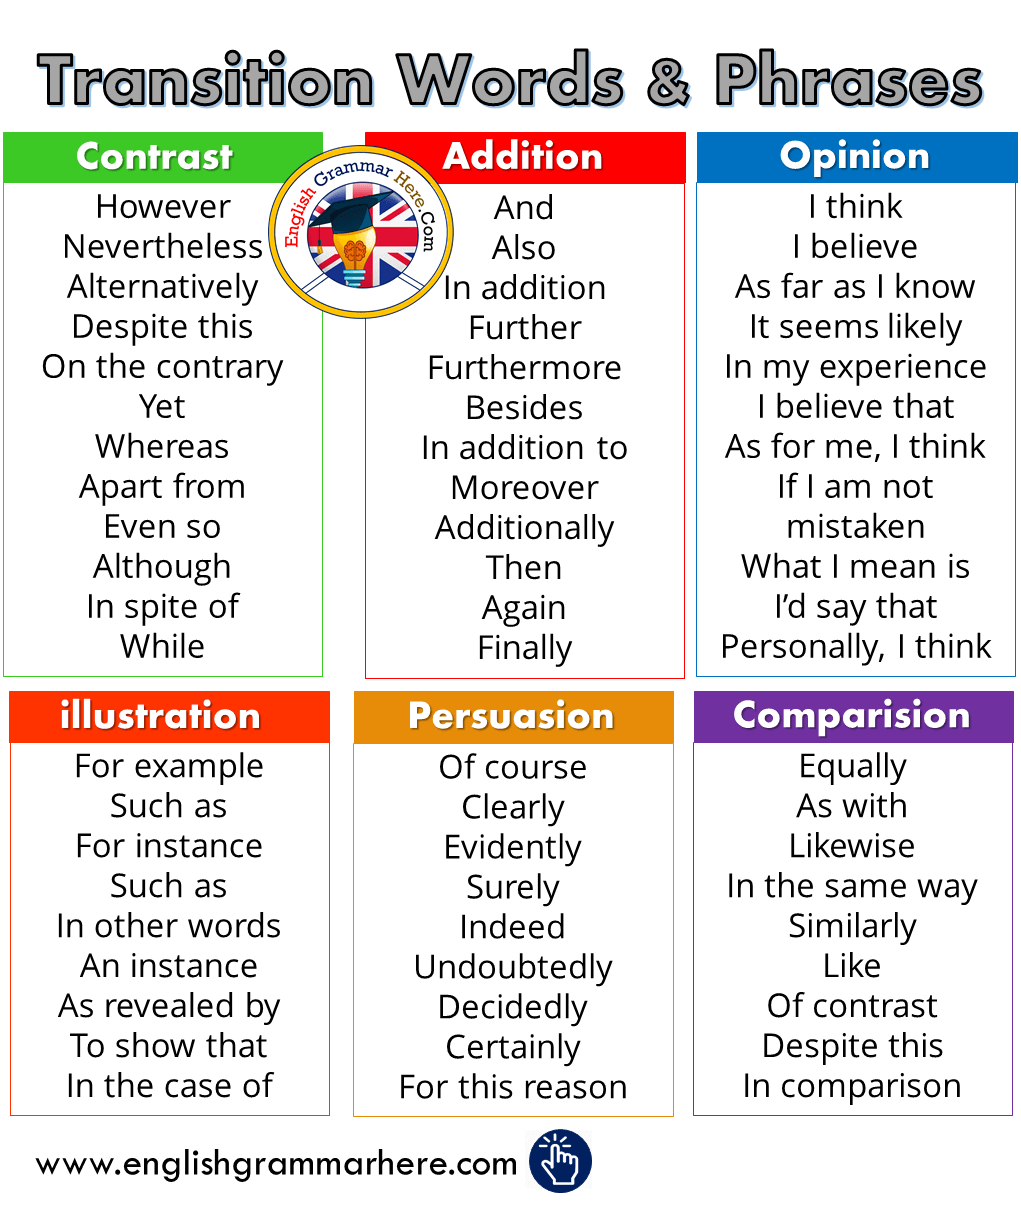 Transition Words and Phrases in English